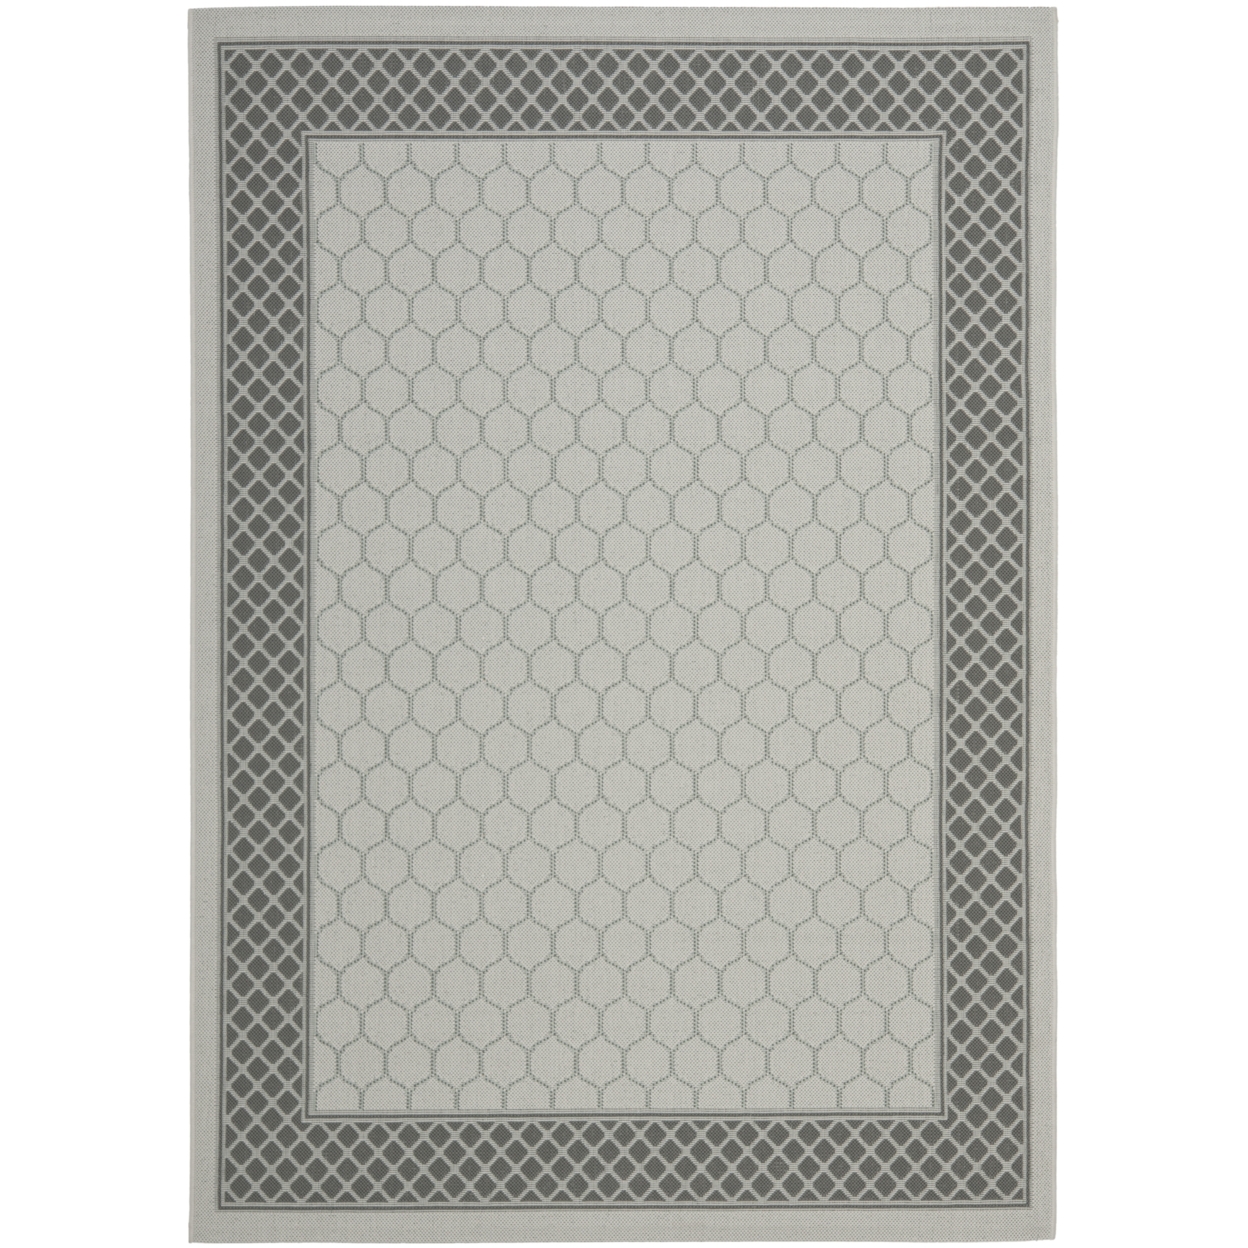 SAFAVIEH Outdoor CY7933-78A18 Courtyard Lt Grey / Anthracite Rug - 4' X 5' 7